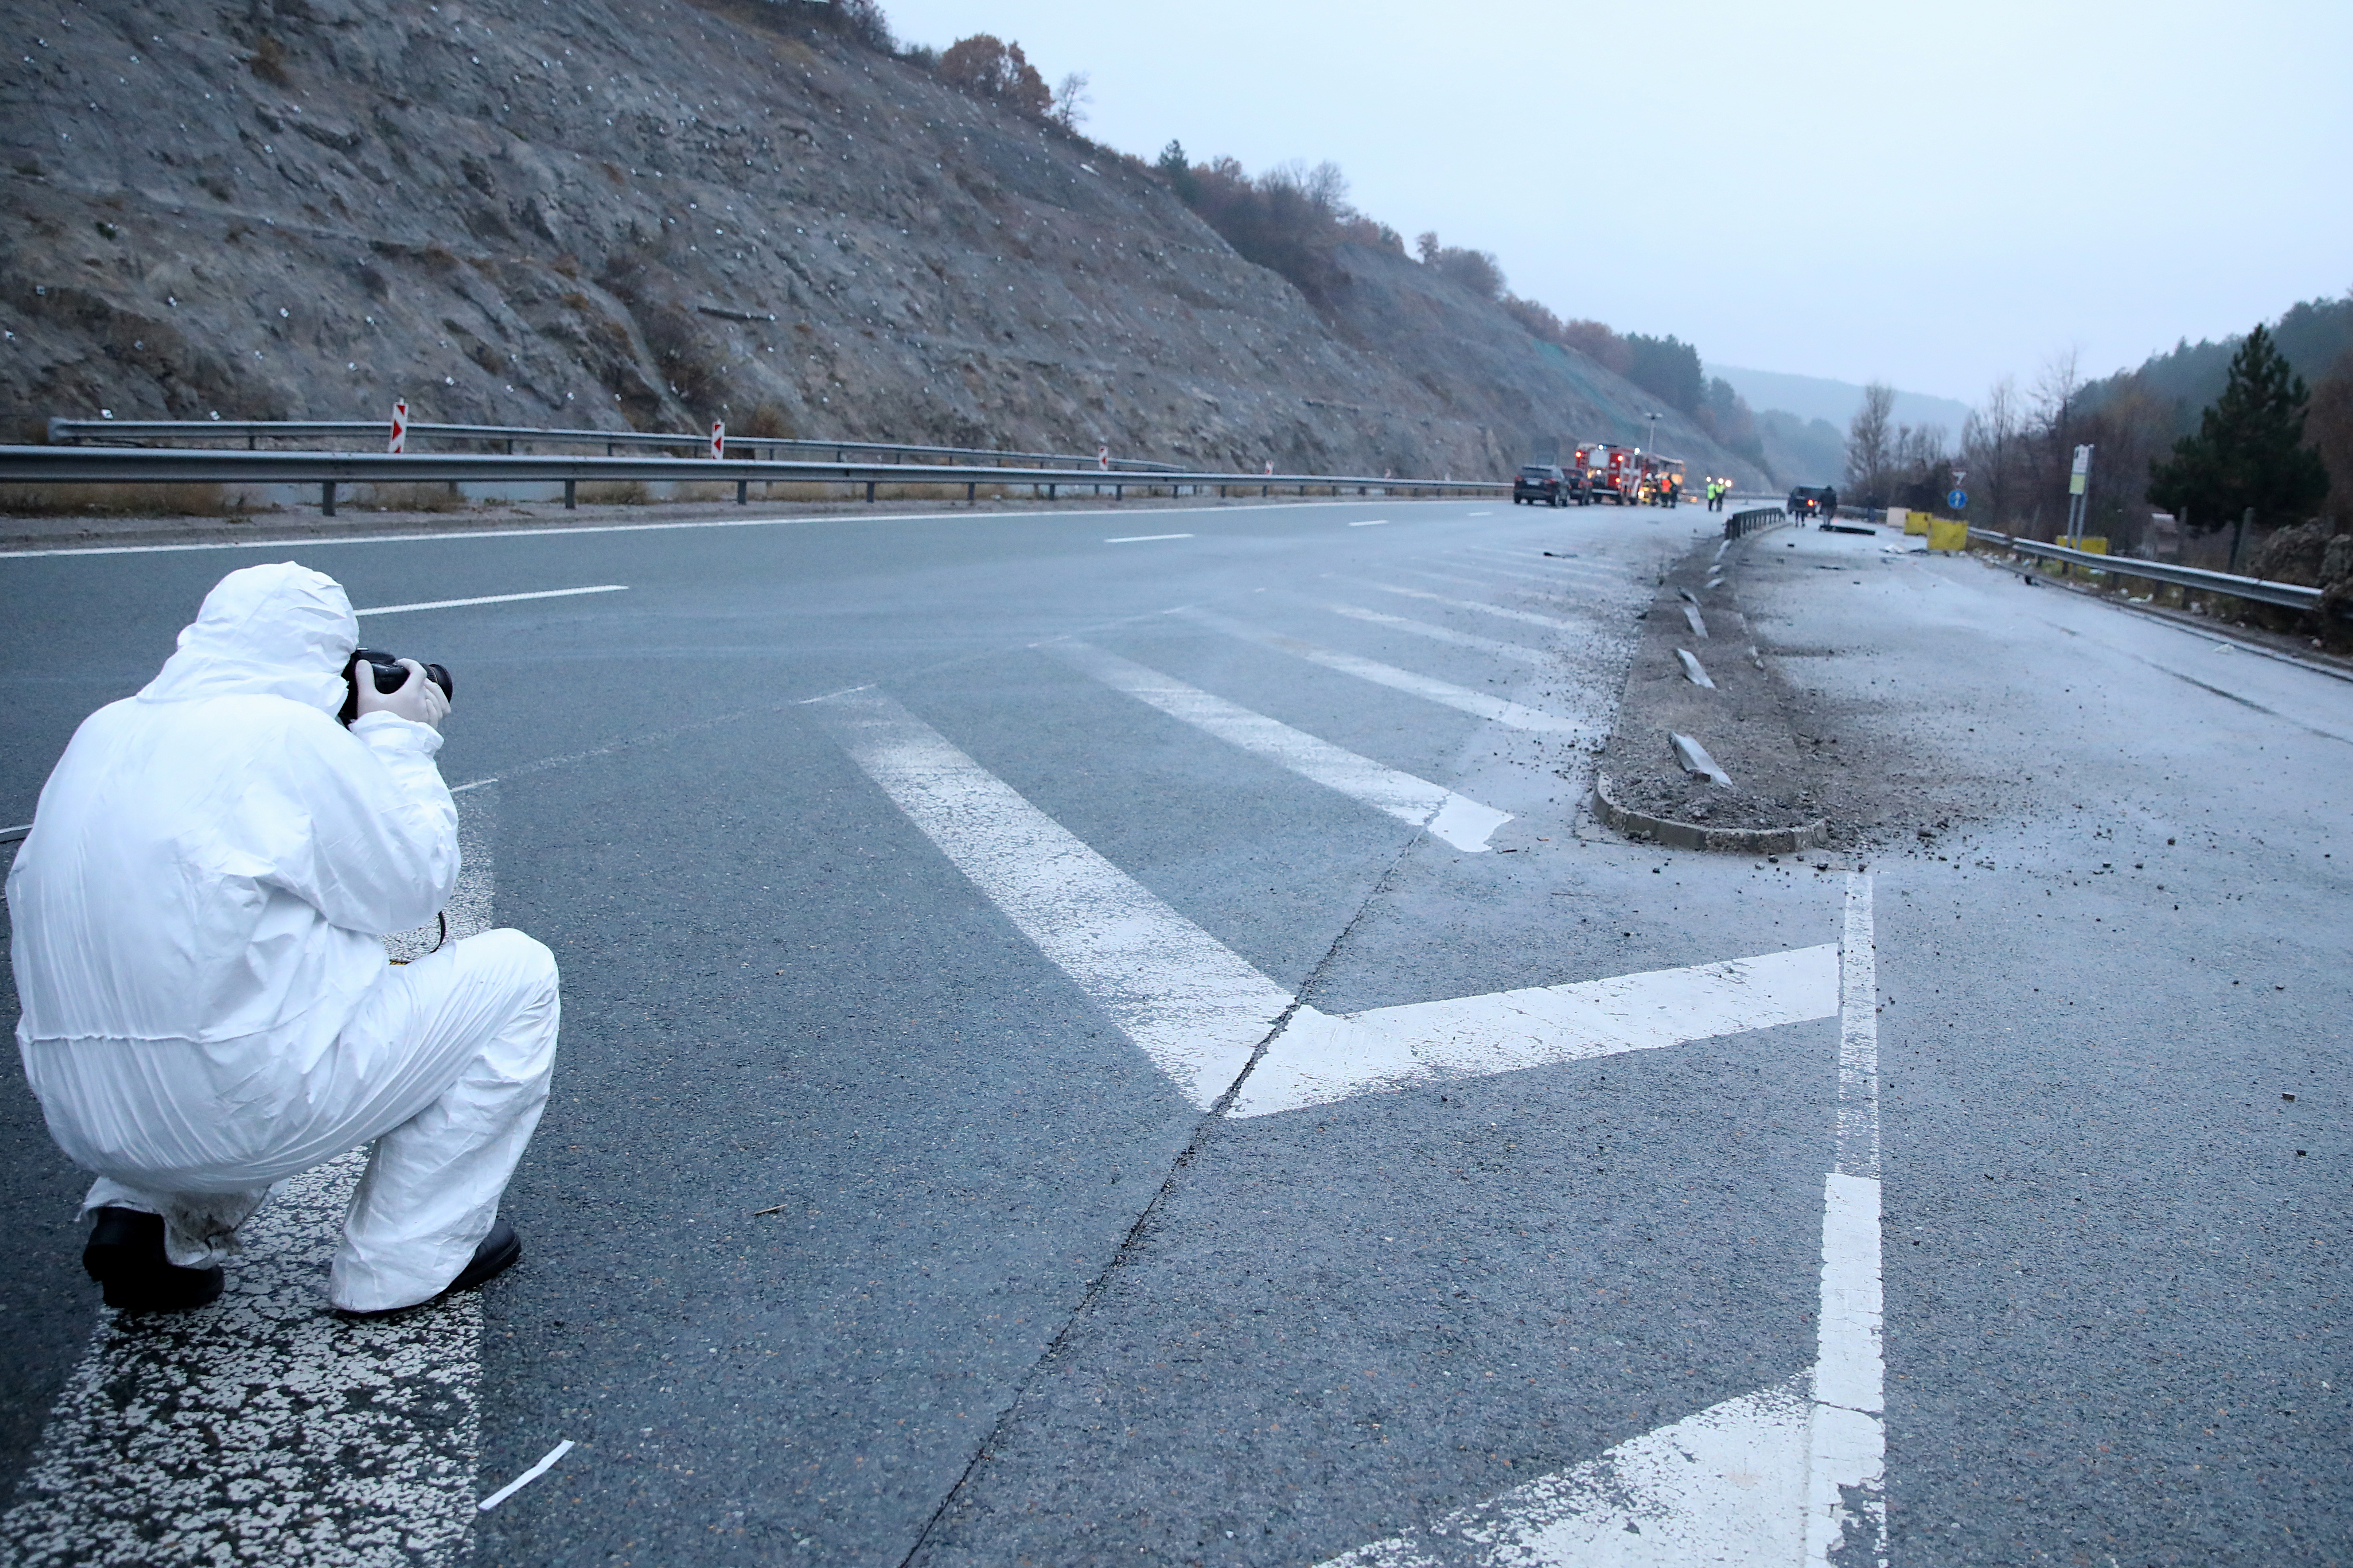 A member of forensic police works near the site where a bus with North Macedonian plates caught fire on a highway, near the village of Bosnek, Bulgaria, November 23, 2021. REUTERS/Stoyan Nenov